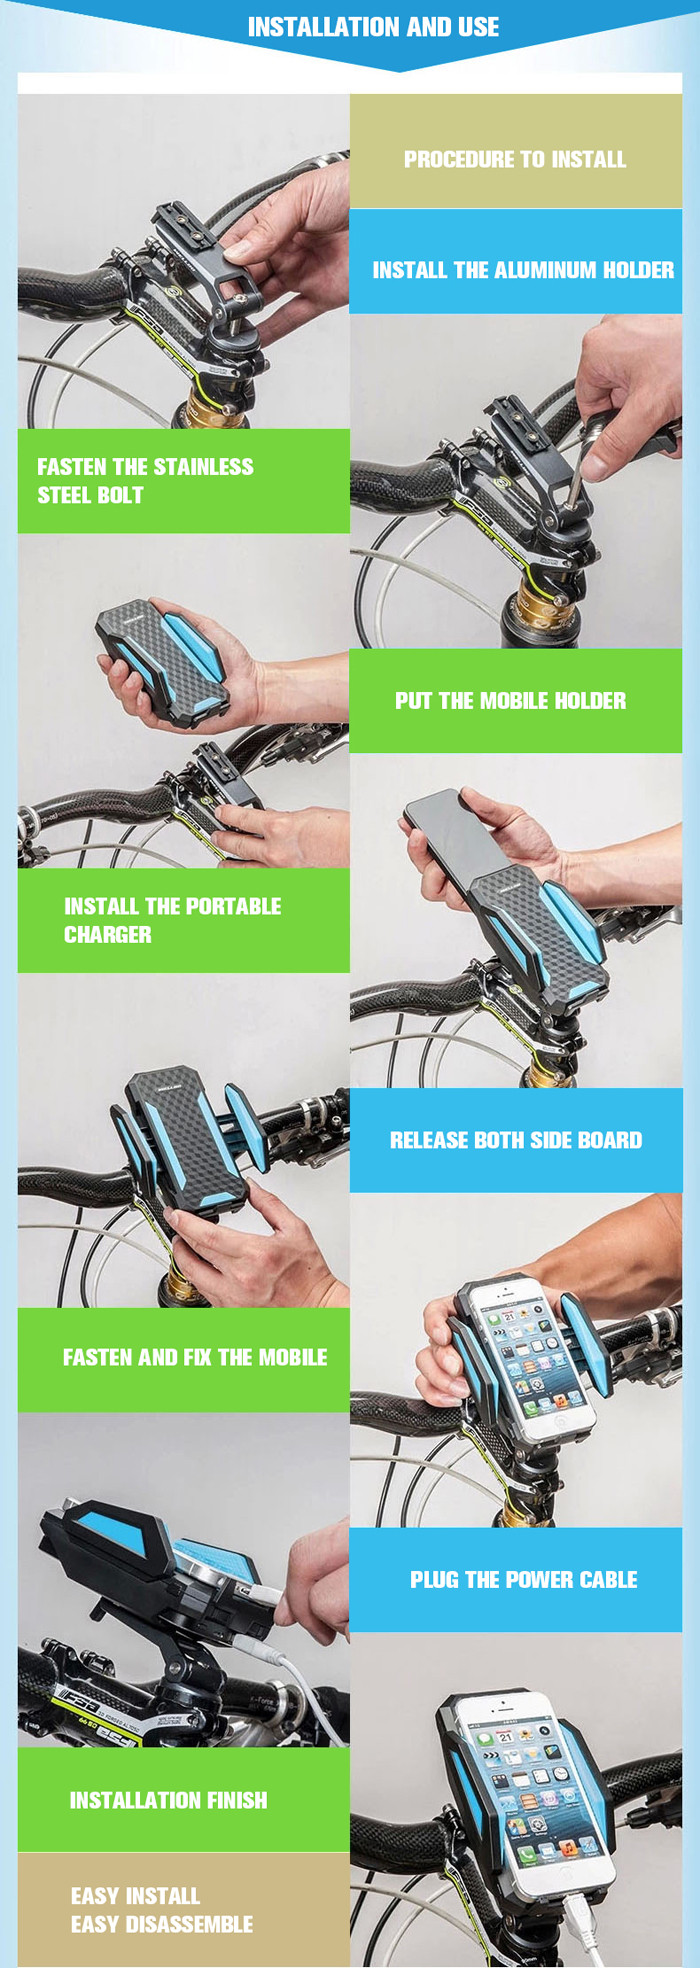 mobile phone holder for bicycle